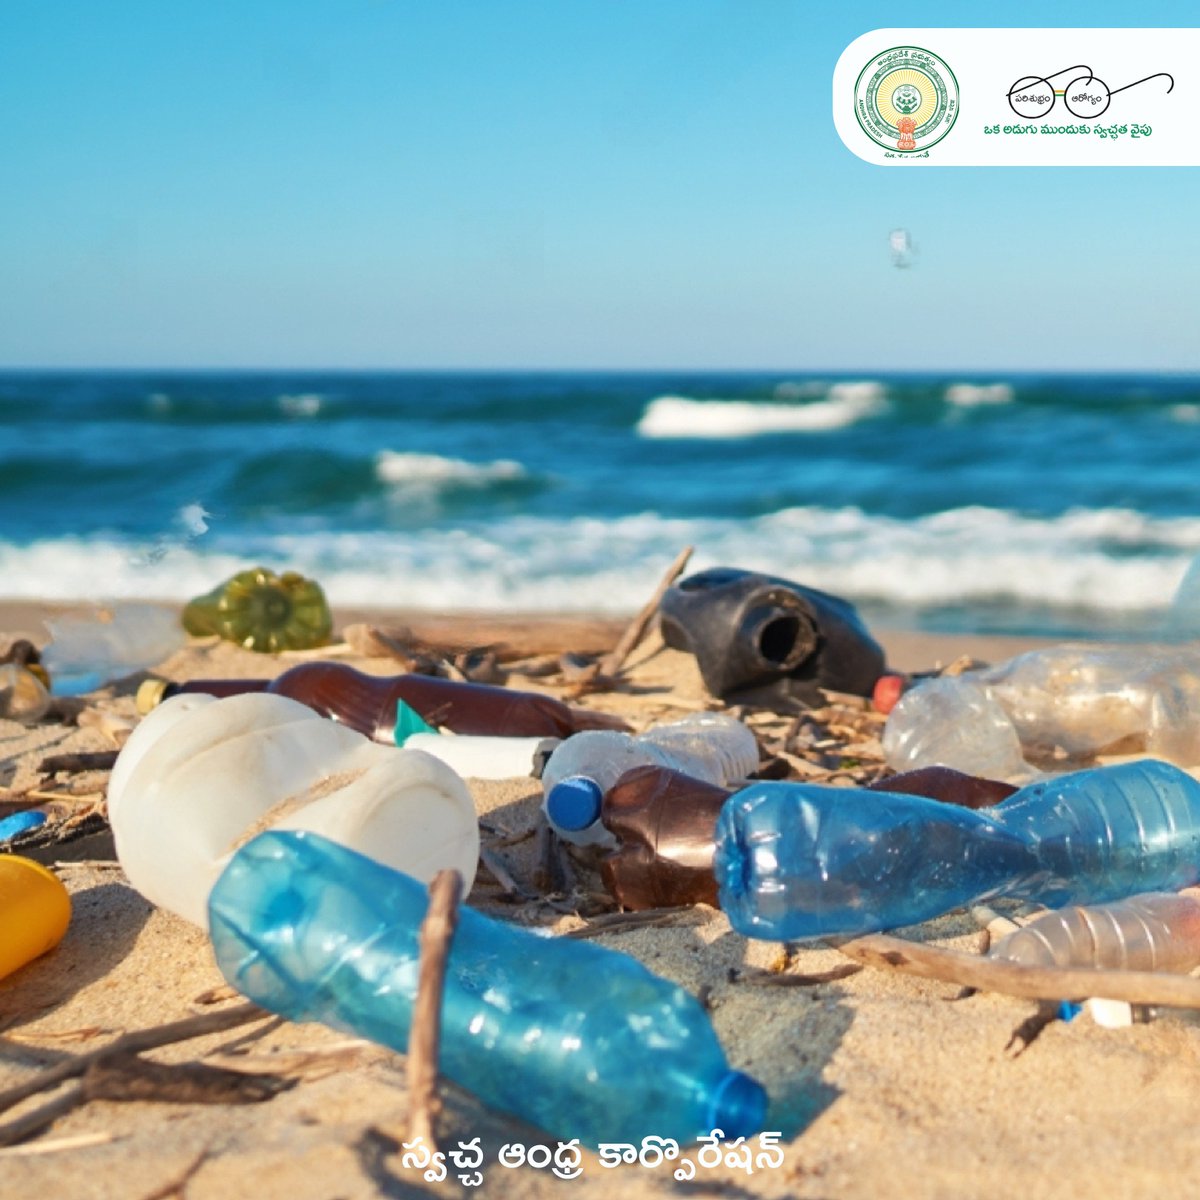 'Our beautiful planet deserves better than this! It's time to take a stand against plastic pollution. Join the movement for a cleaner and healthier world. 🌍♻️ #PlanetVsPlastic #BeatPlasticPollution' @ChandruduIAS